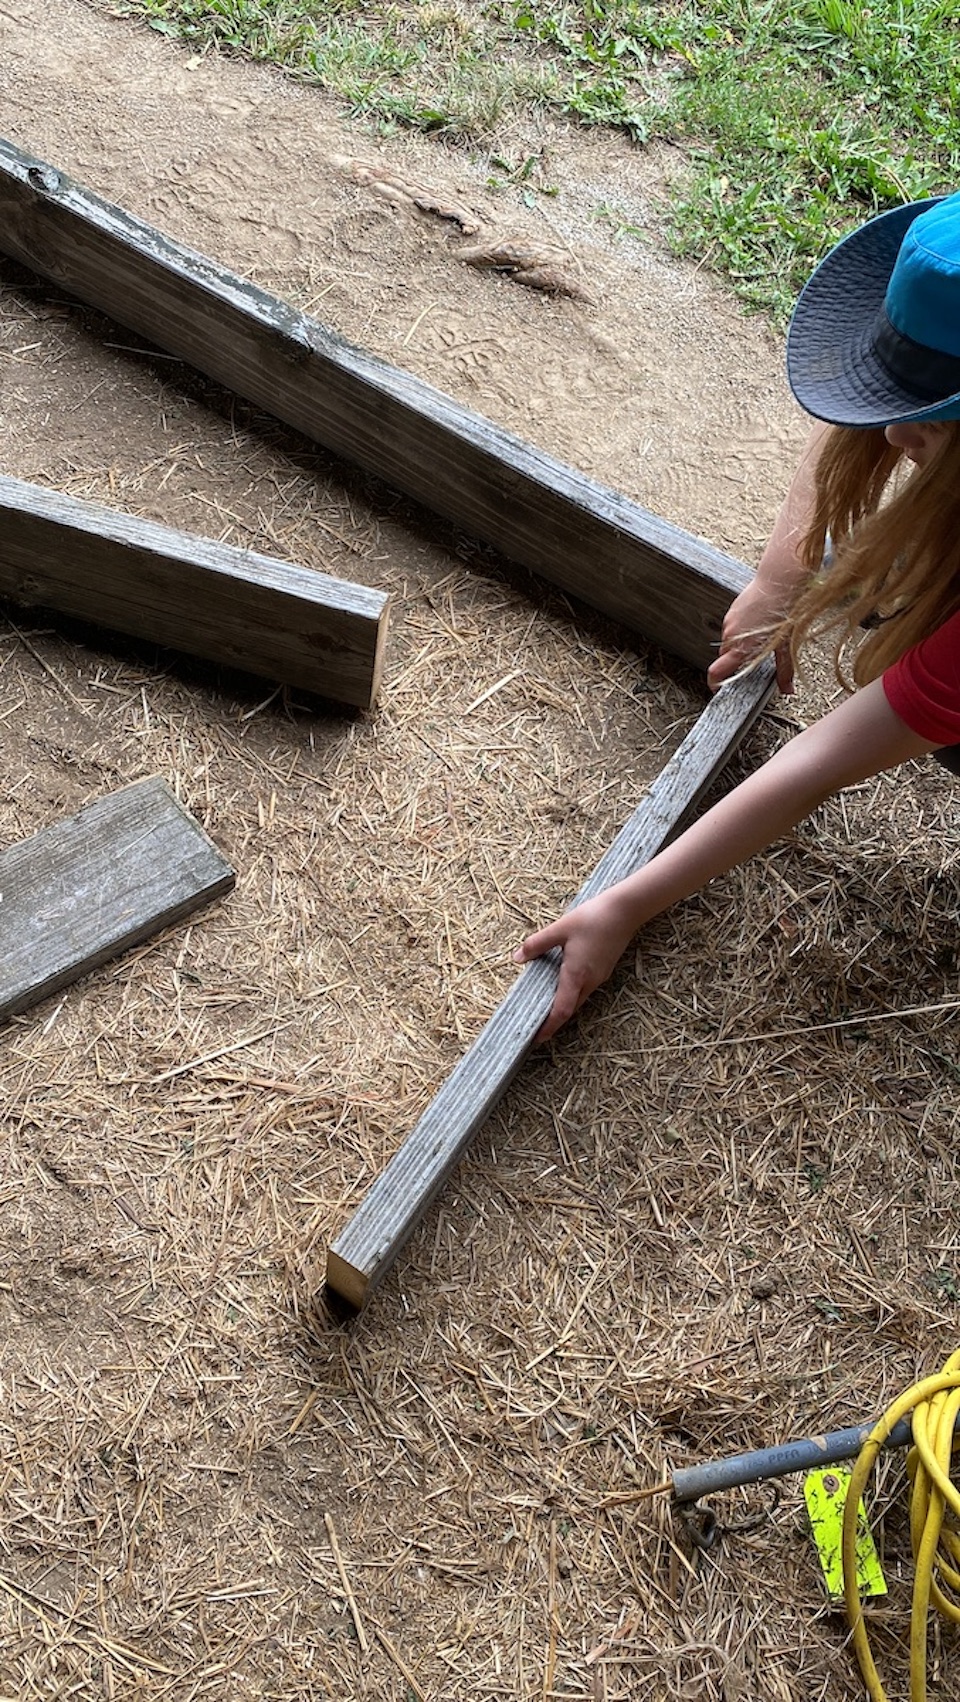 Building the raised bed